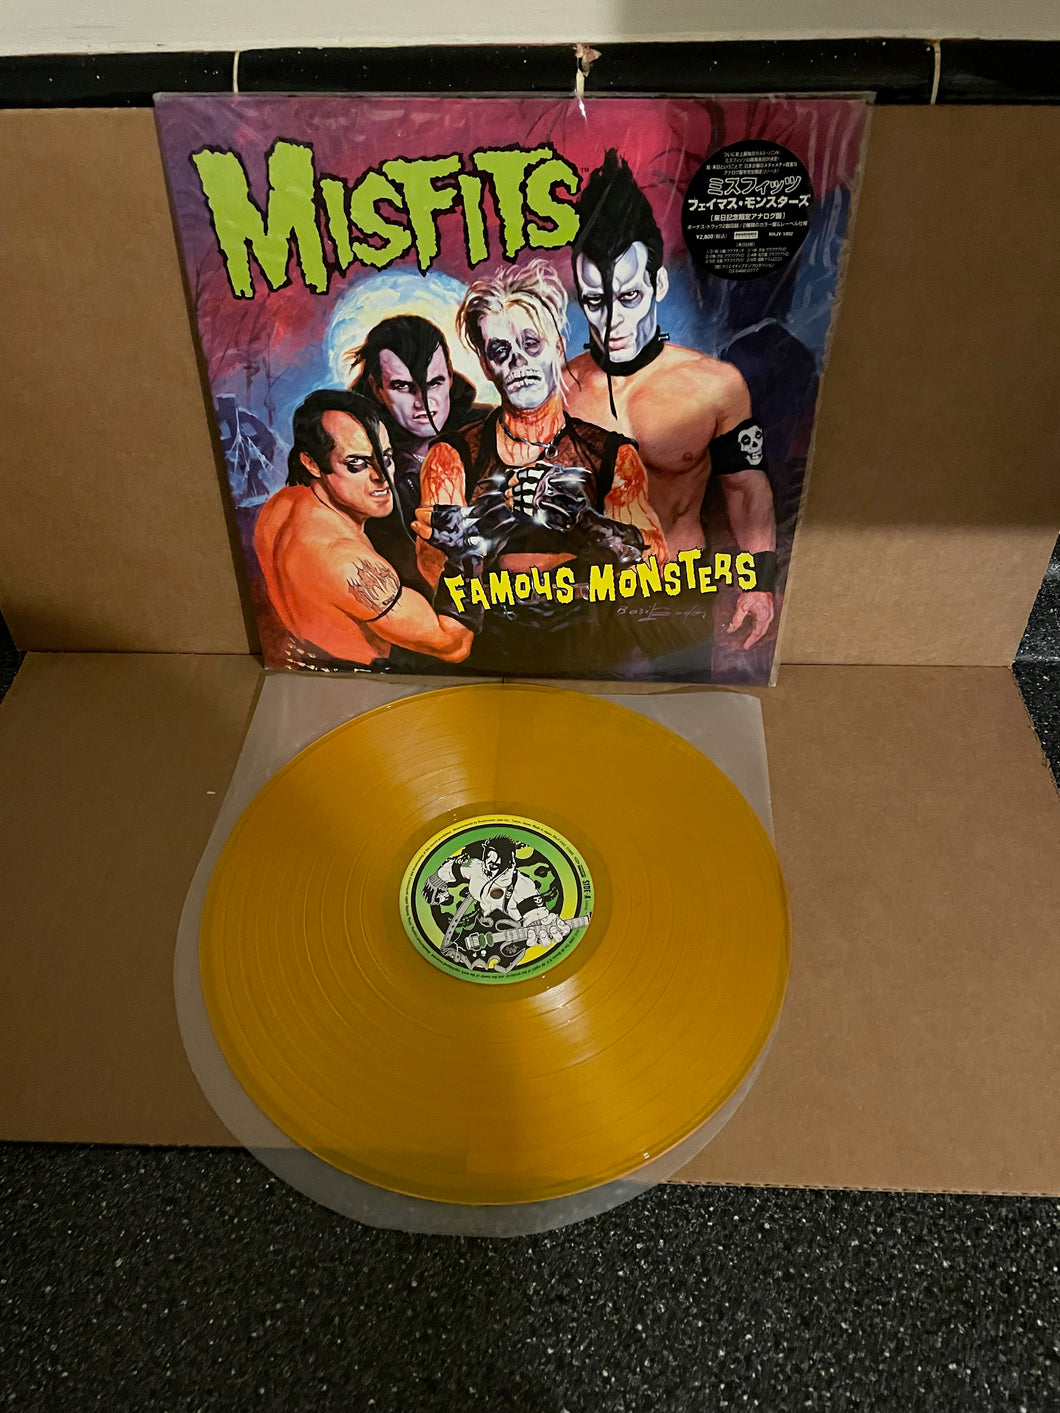 Misfits Famous Monsters LP 2000 Roadrunner Yellow Vinyl Limited to 1500 Not Danzig